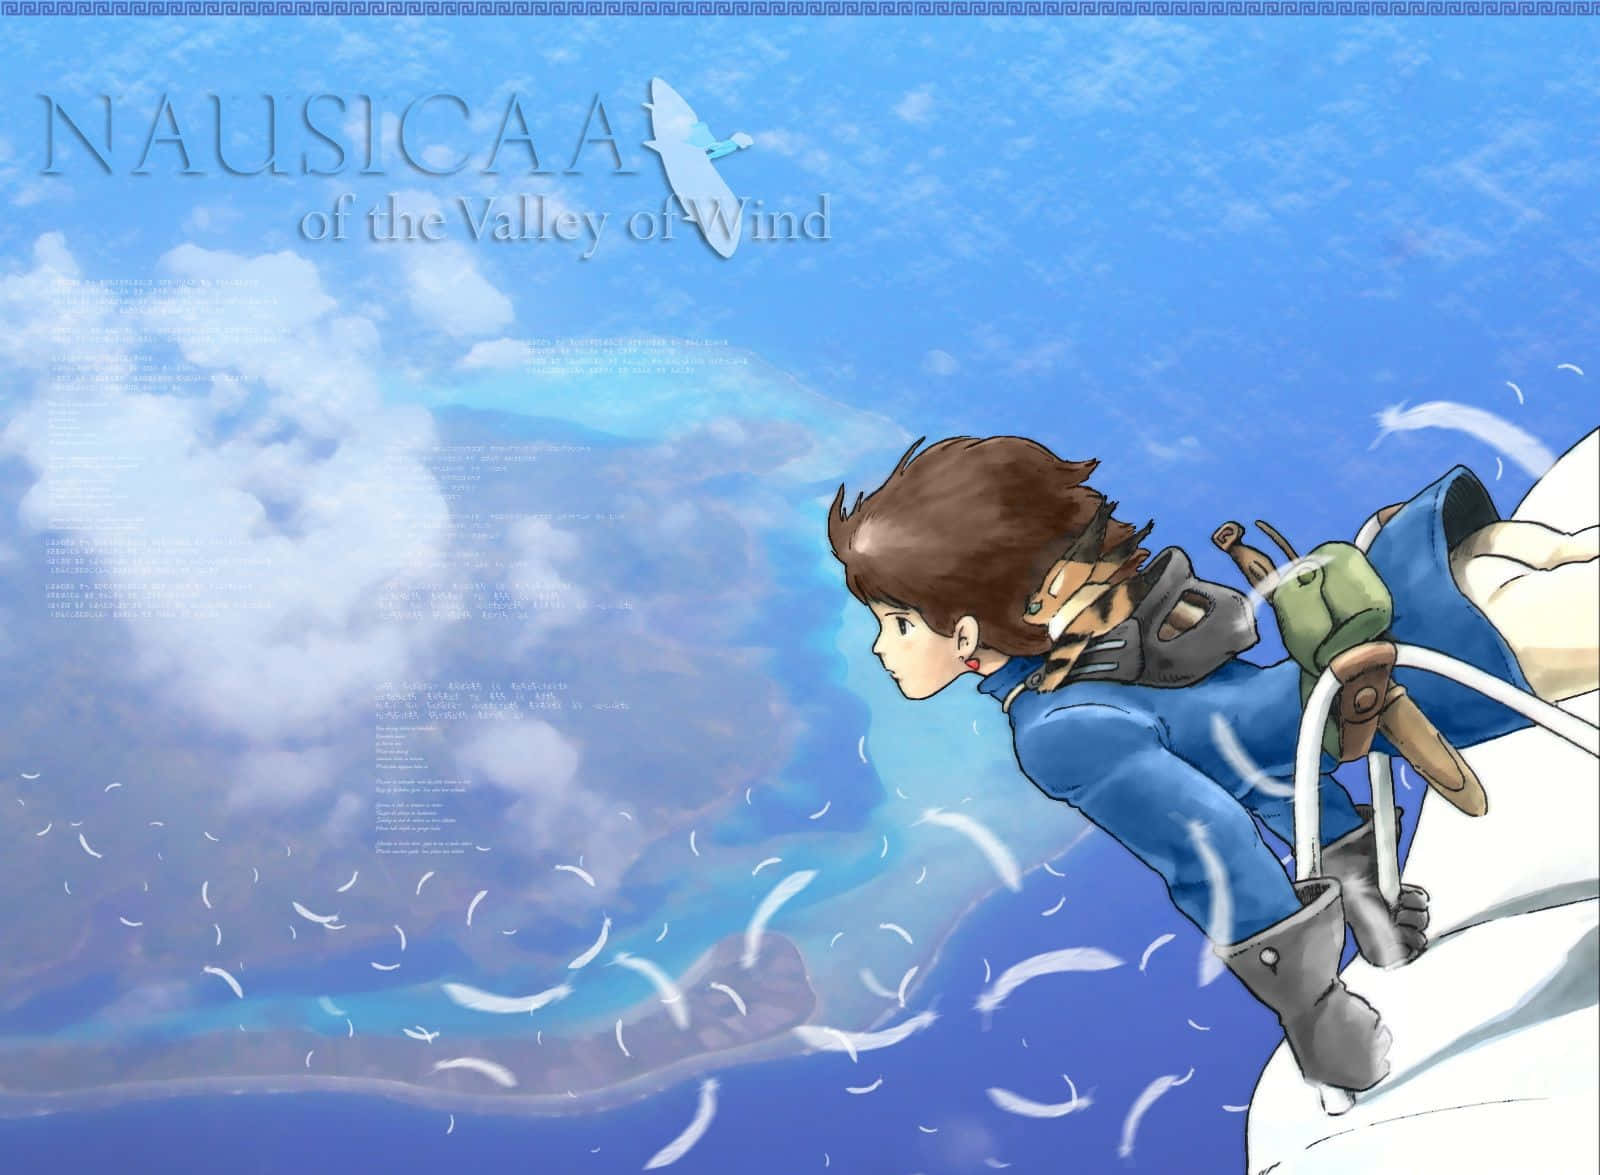 Nausicaä soaring through the skies of the Valley of the Wind Wallpaper